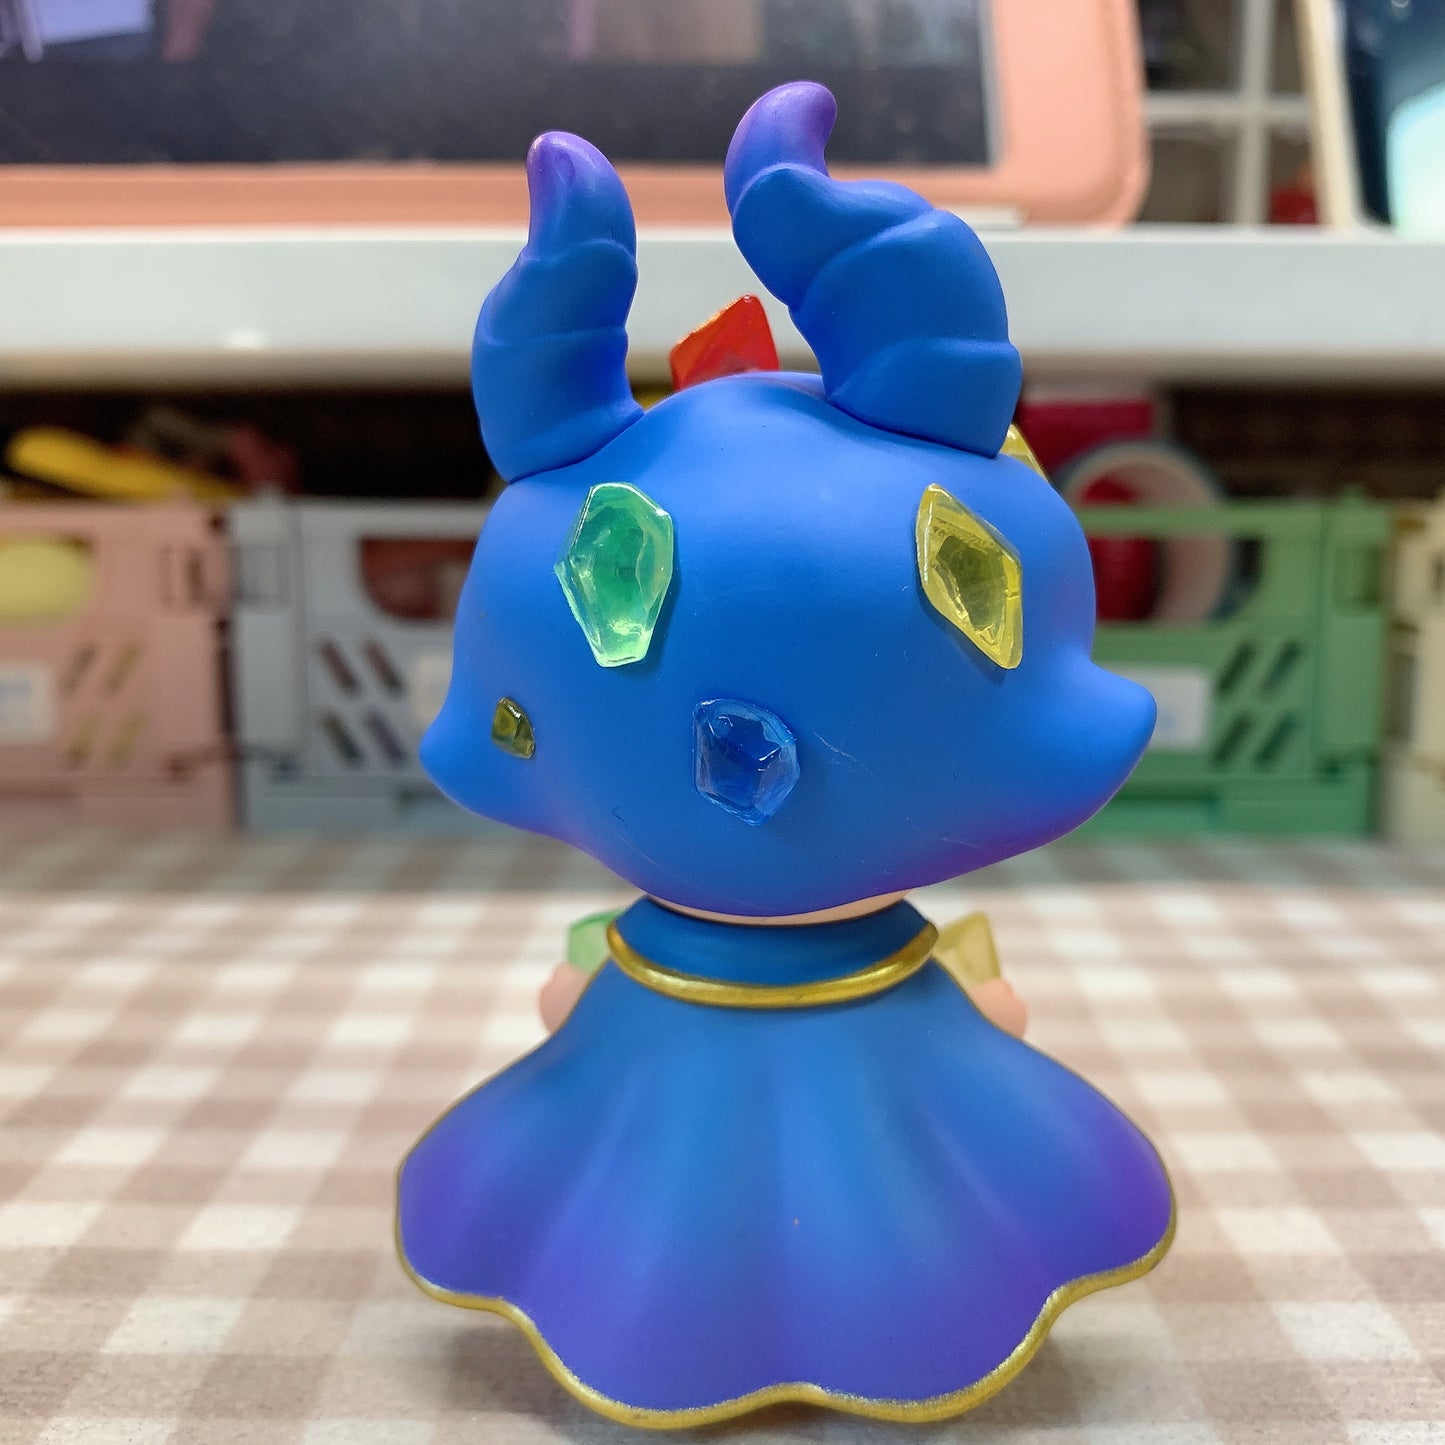 【PRELOVED and SALE 】POPMART Dimoo blind box toy Fairy Tale series Alchemist